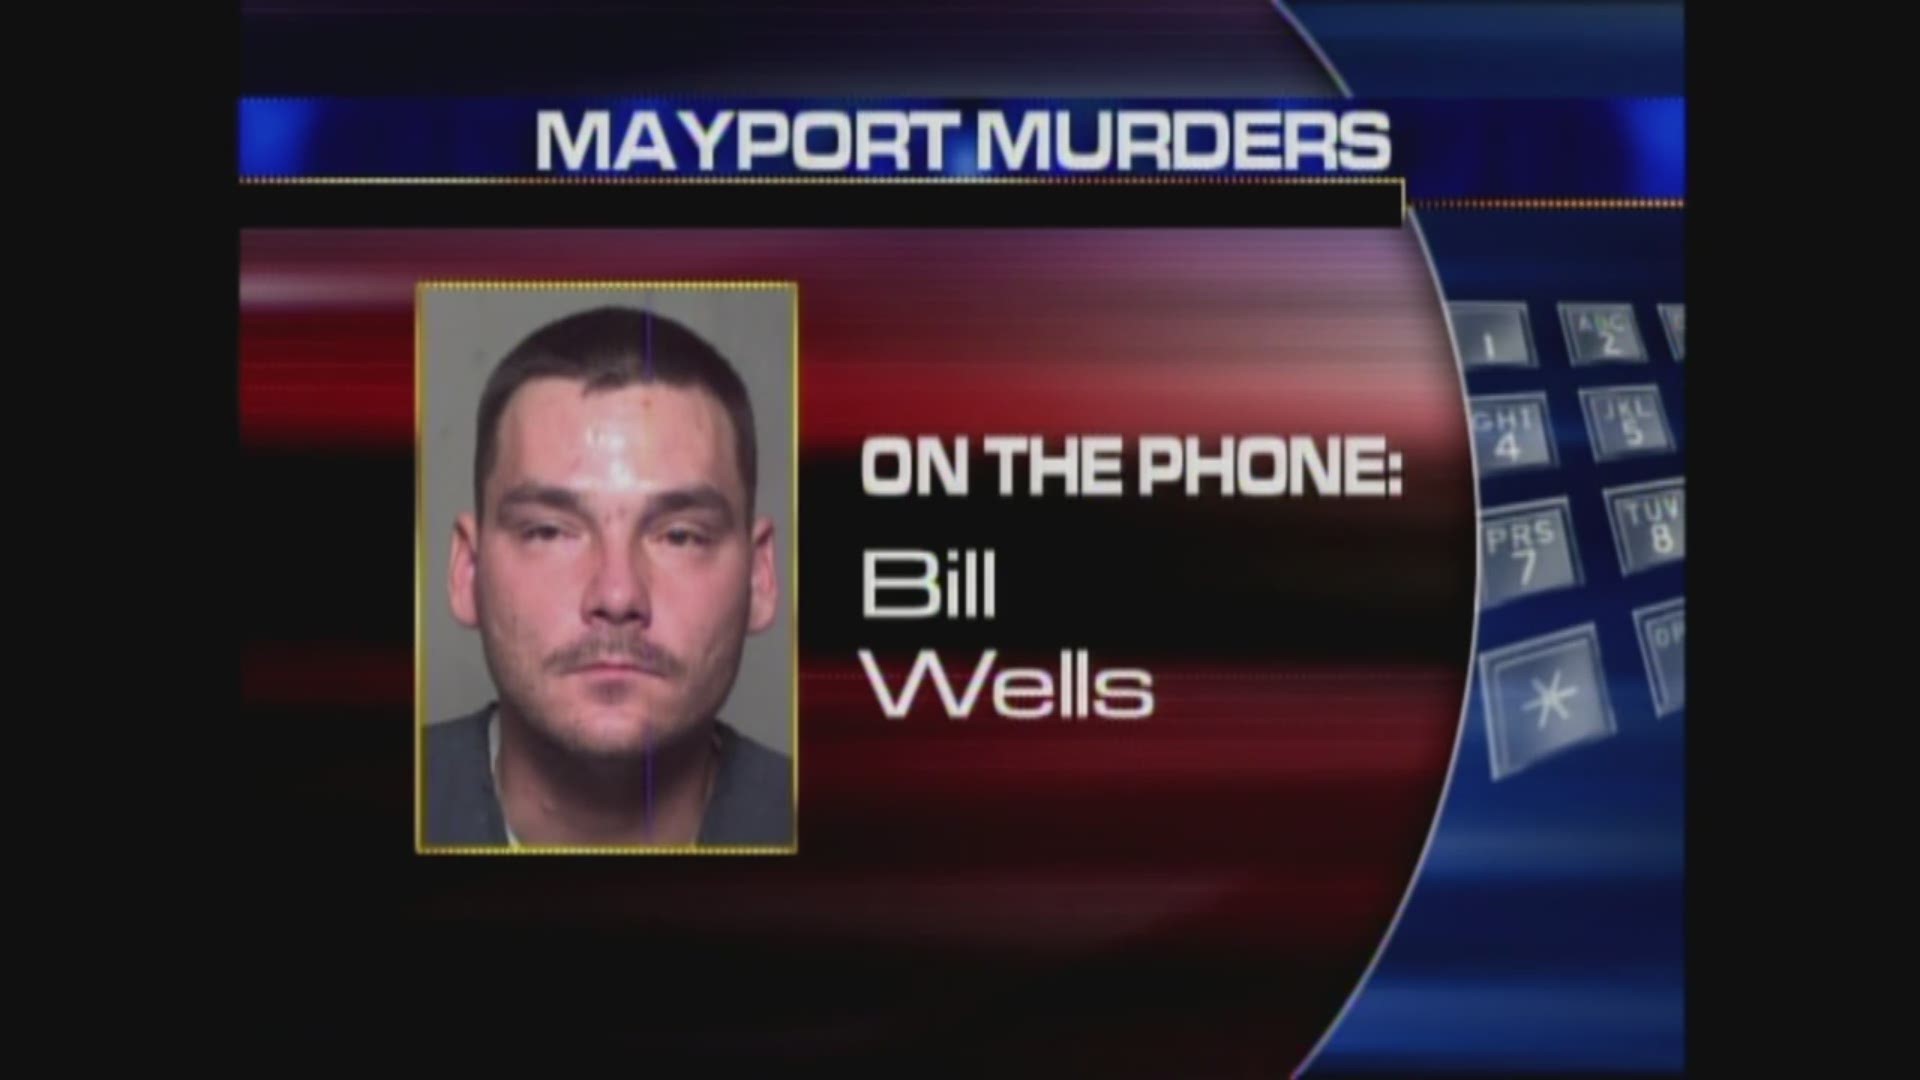 In 2003, William Wells confessed to First Coast News that he killed five people in Mayport. In this phone interview from 2003, he says he is willing to plead guilty to receiving the death penalty.